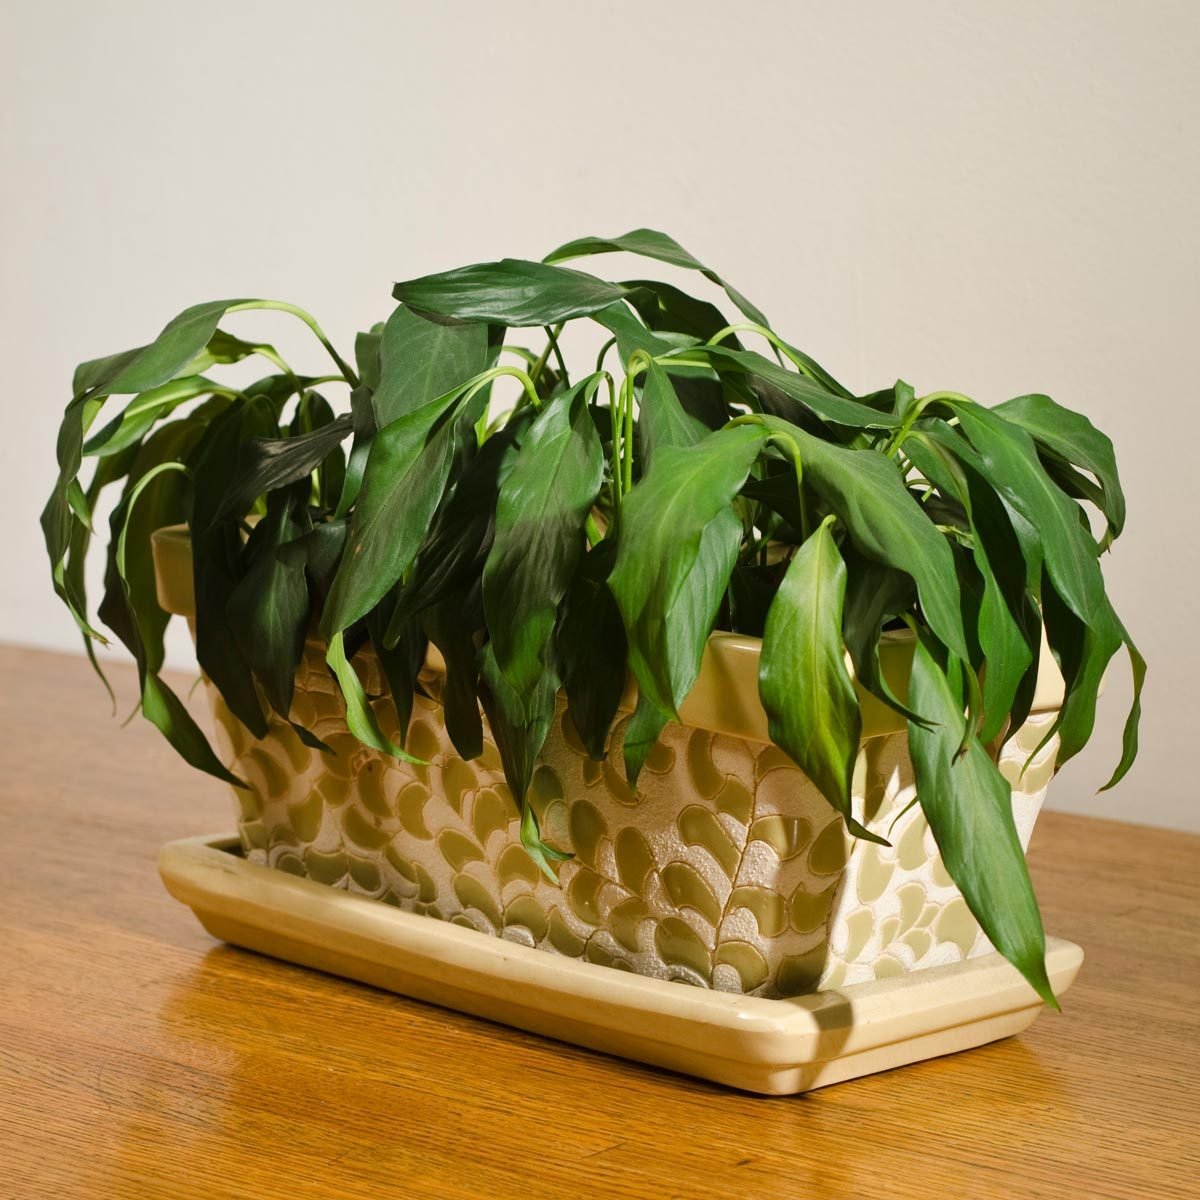 How to Save a Houseplant on the Brink